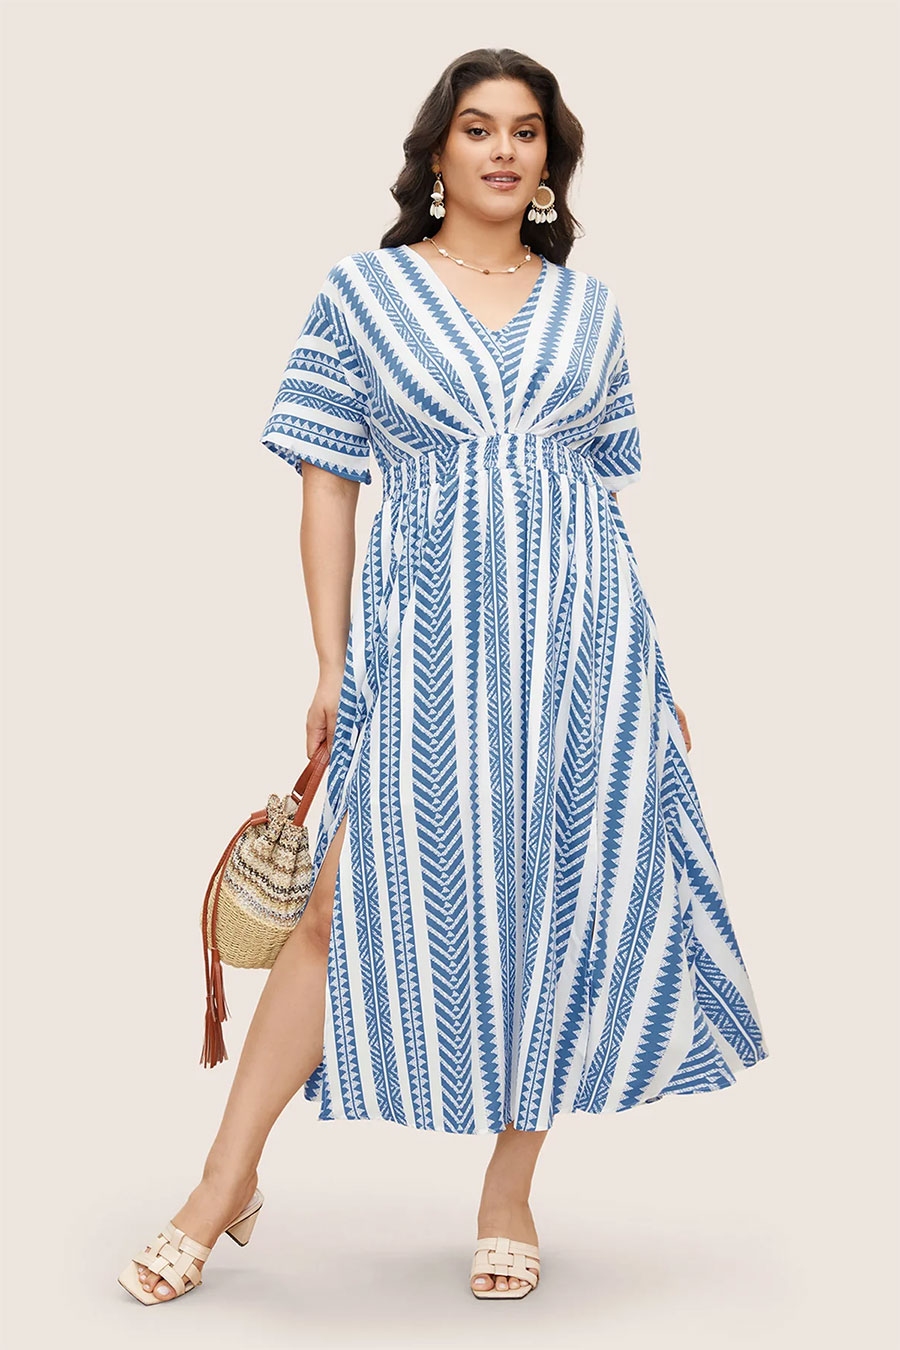 Blue and White Patterned Dress